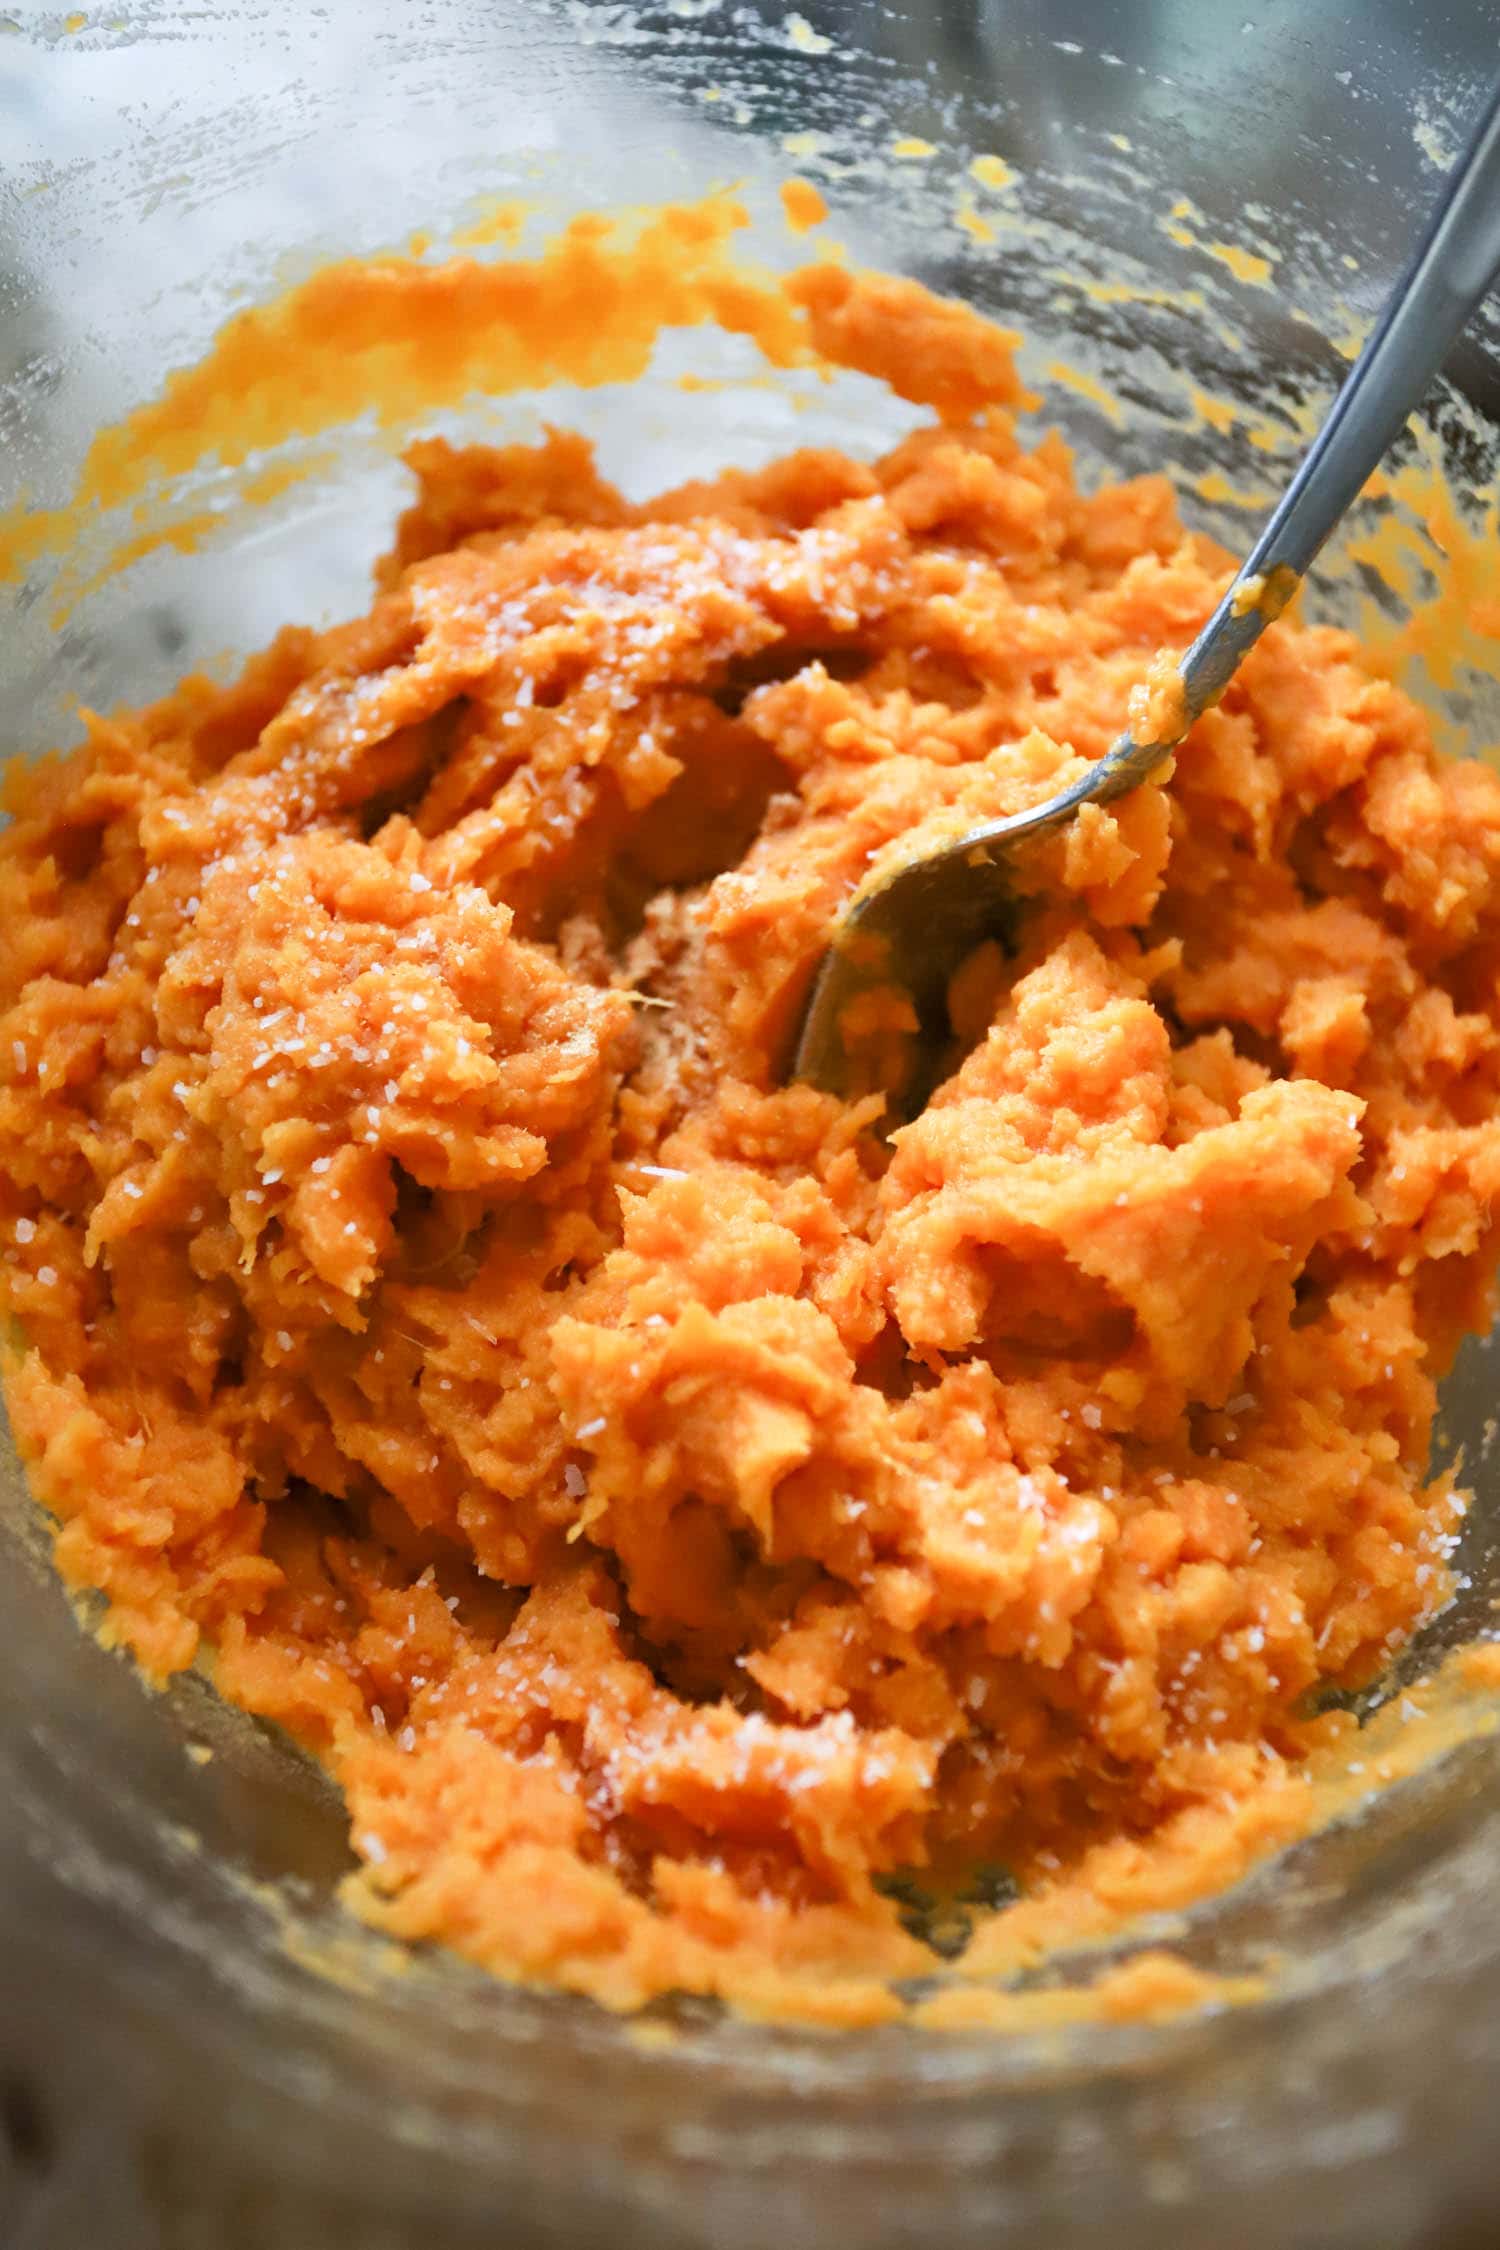 mashed sweet potatoes in a bowl sprinkled with kosher salt.